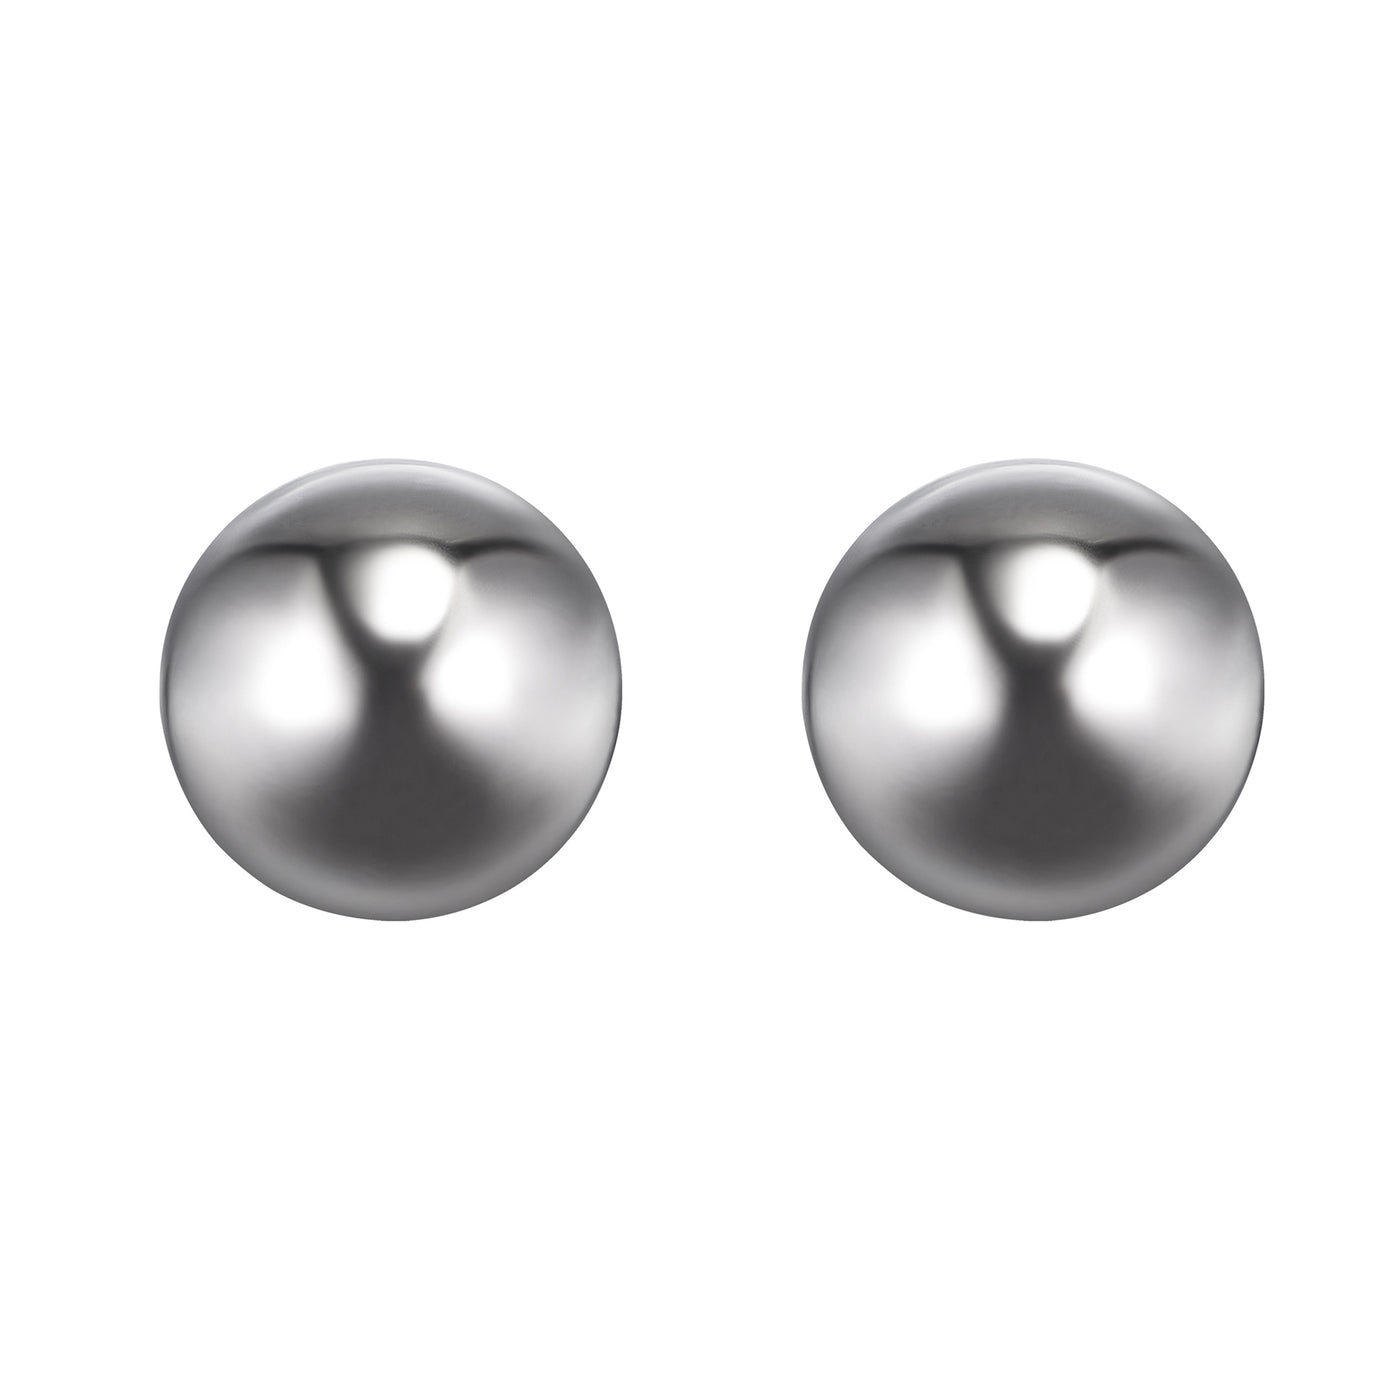 uxcell Uxcell 201 Stainless Steel Bearing Ball G200 Precision Balls